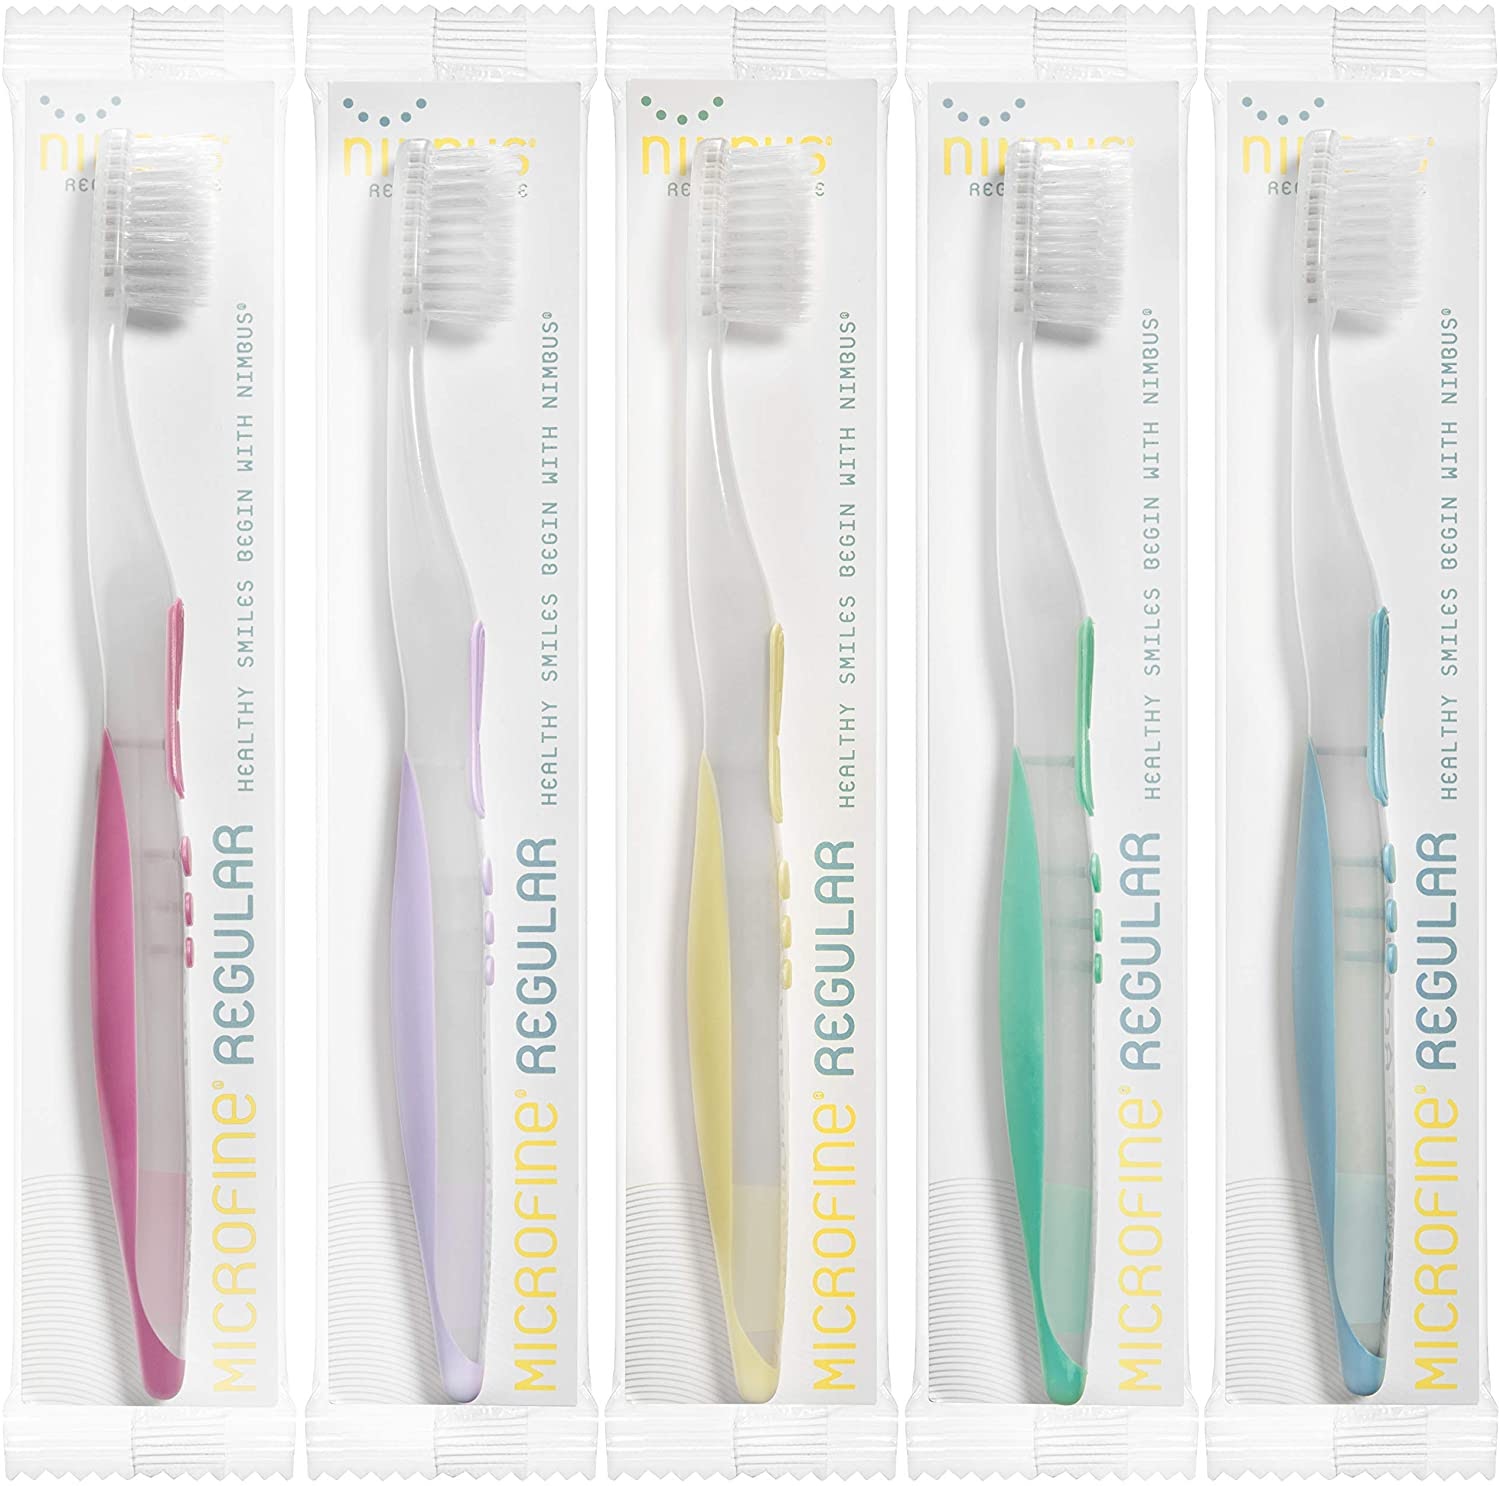 The Top 3 Manual Toothbrushes I Recommend to Patients 2